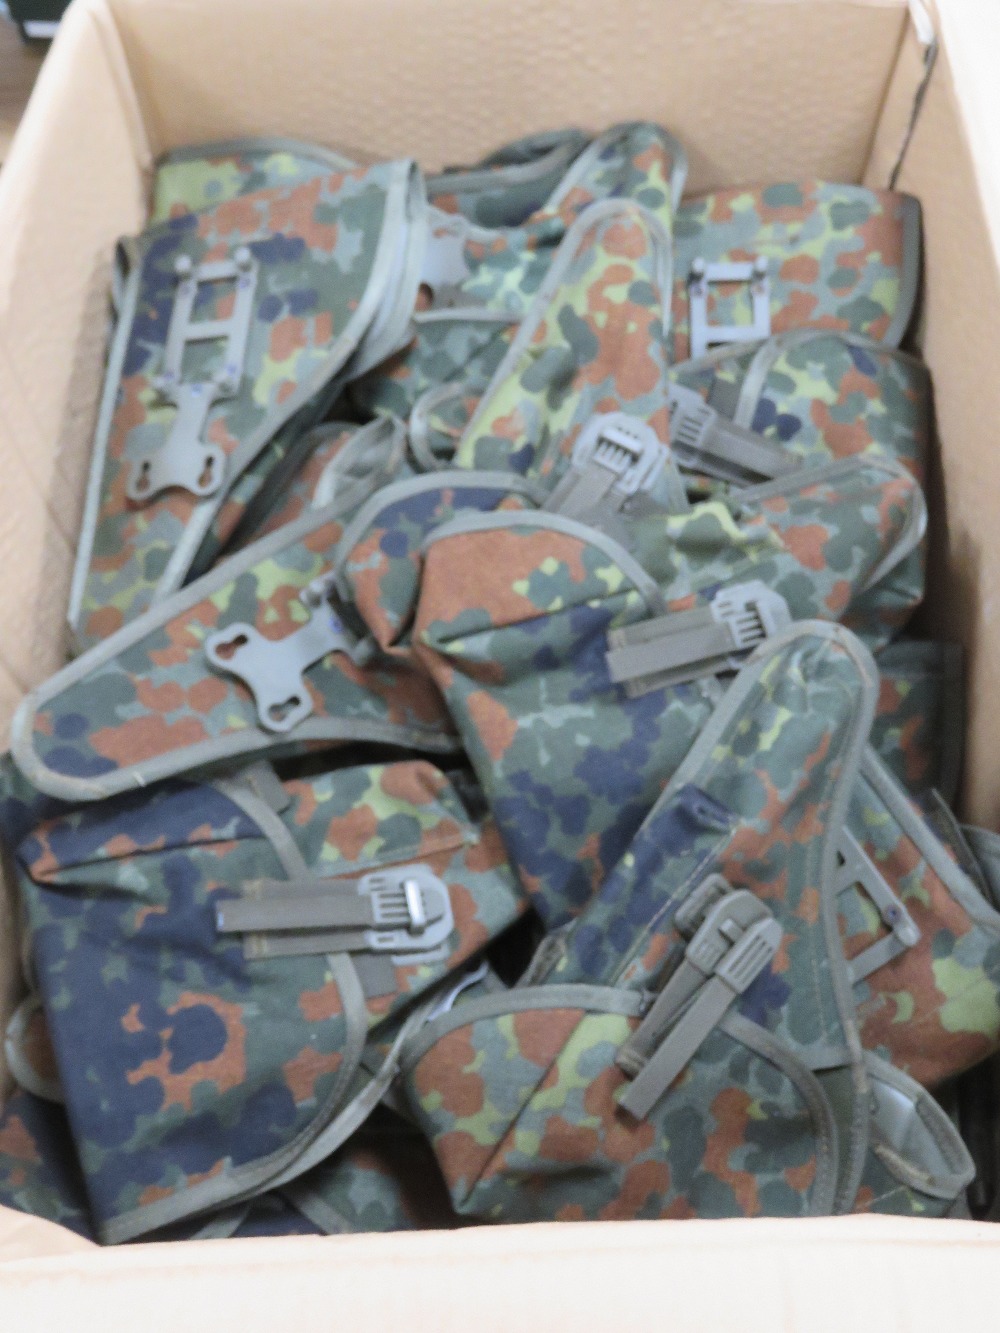 A box containing a quantity of P1/P38 Bundeswehr holsters.